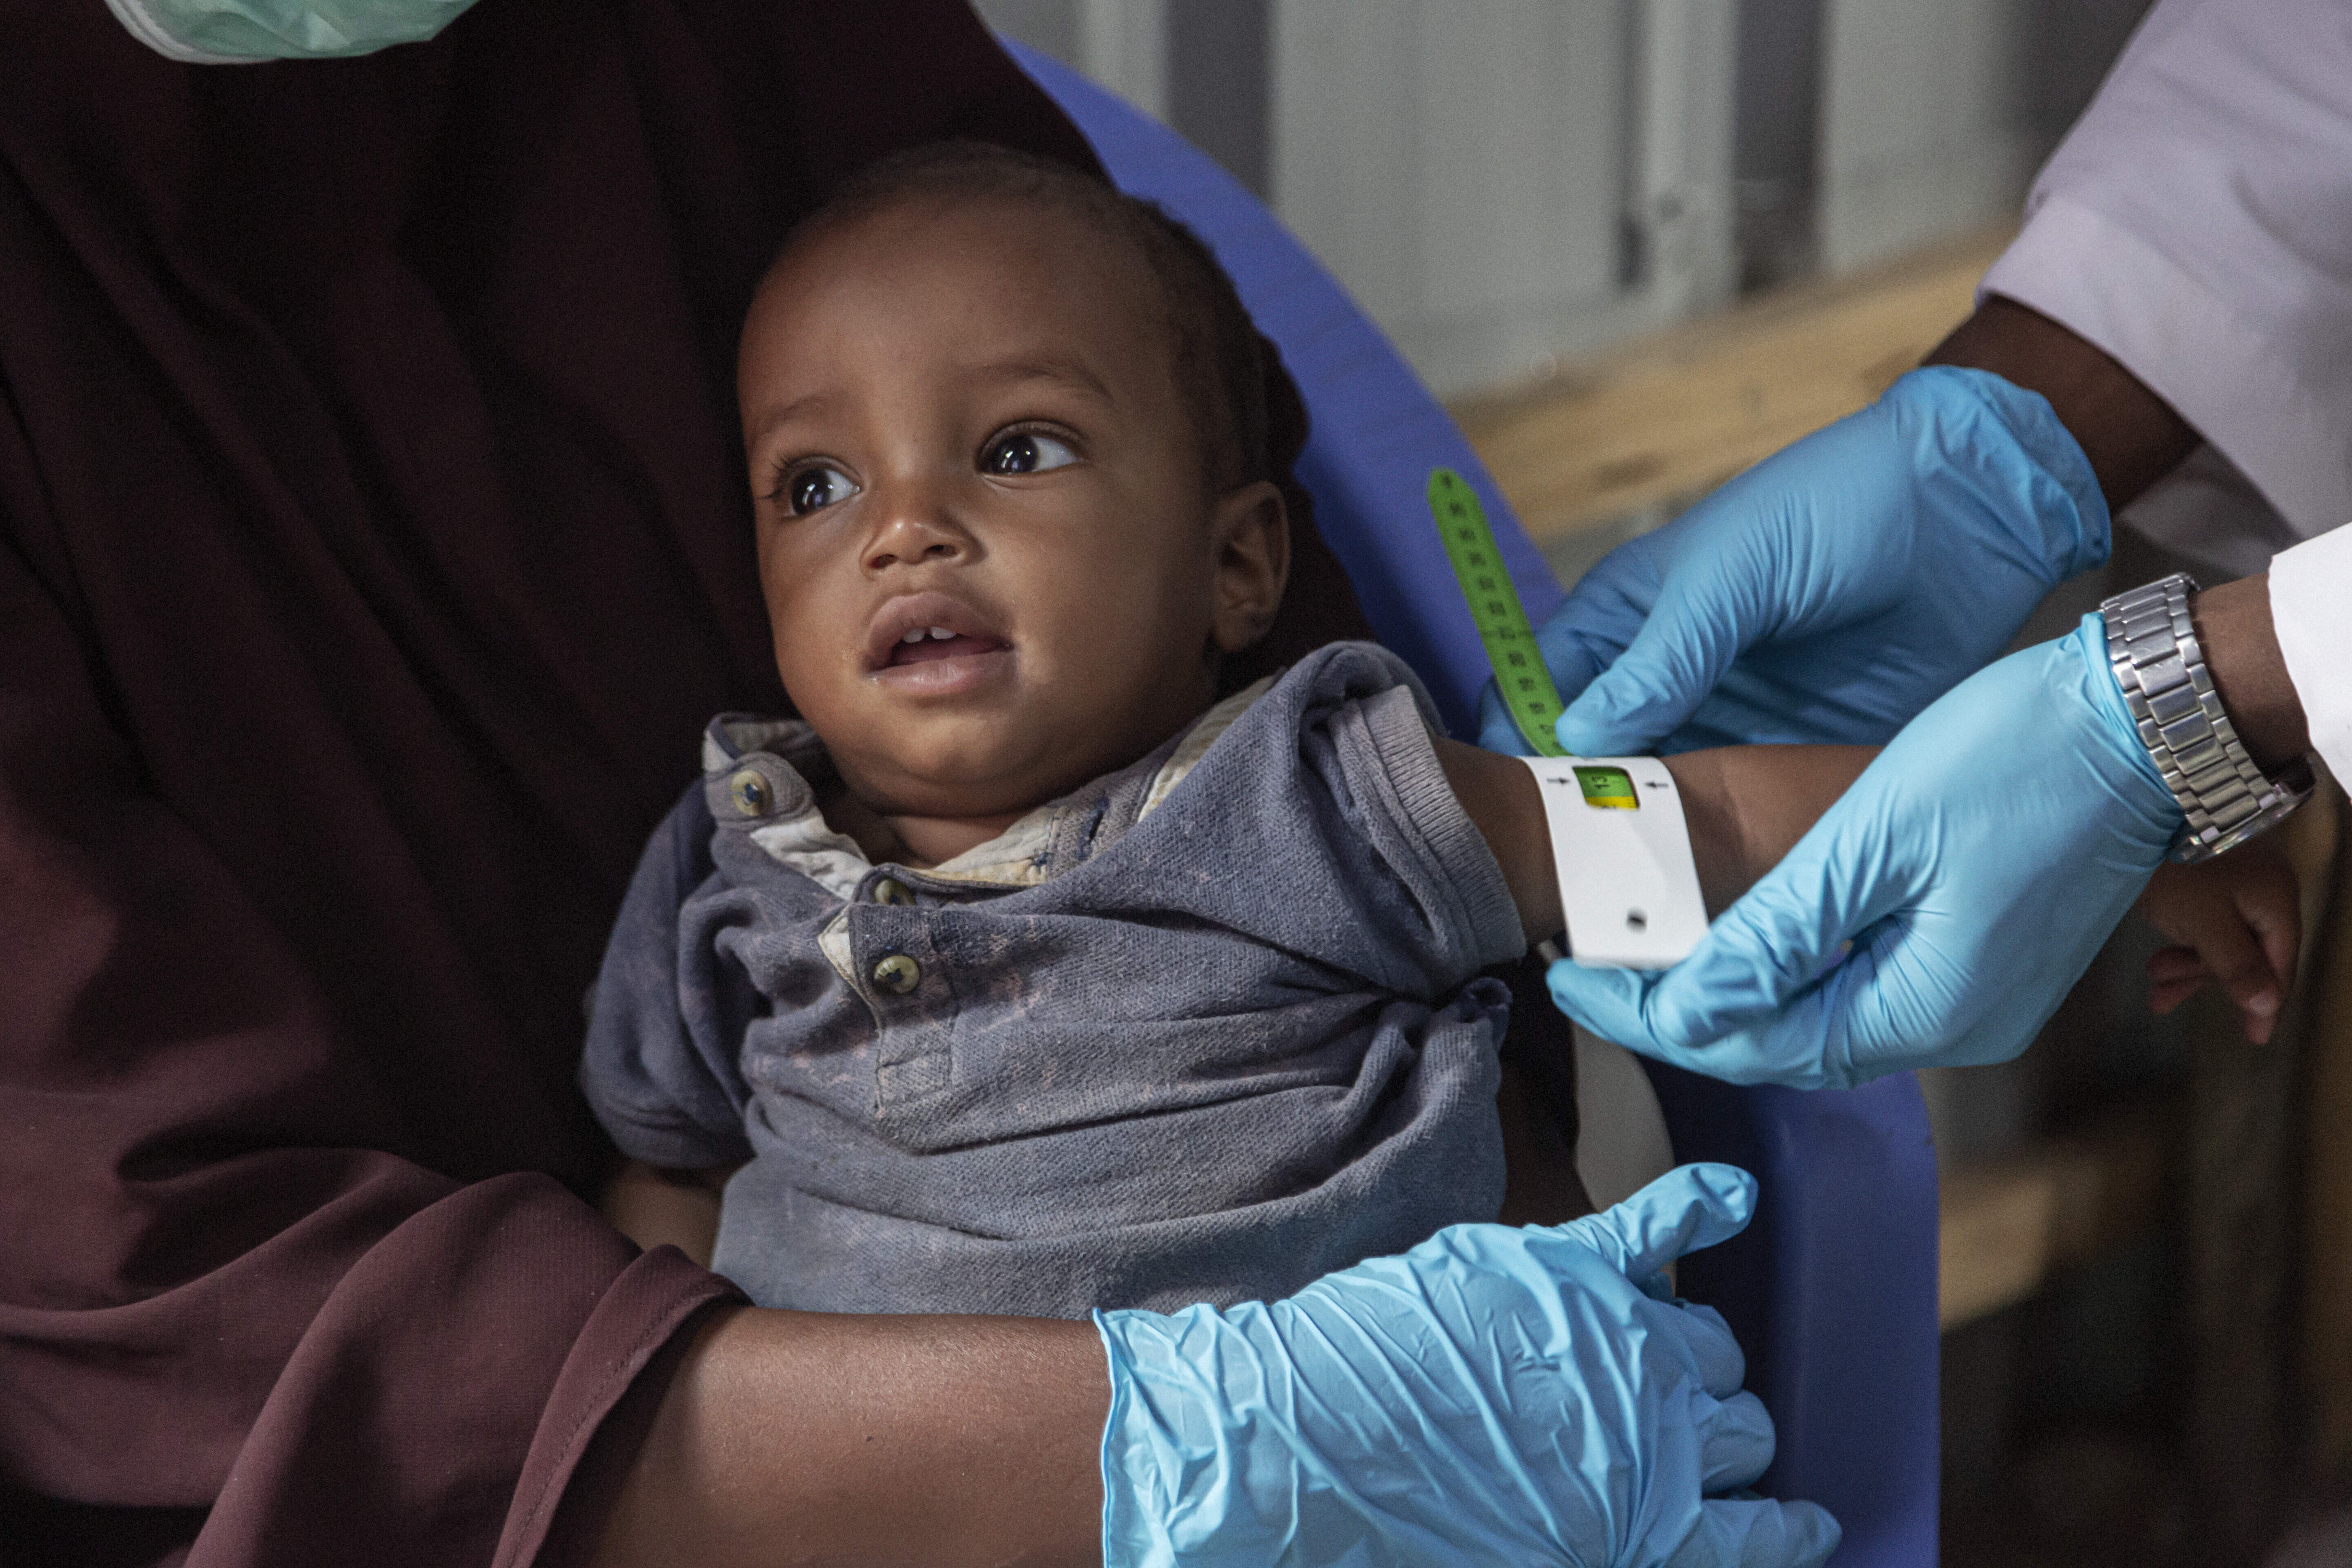 Amina's son, while sitting on his mother's lap, has his arm circumference measured by an IRC staff member wearing blue gloves. 